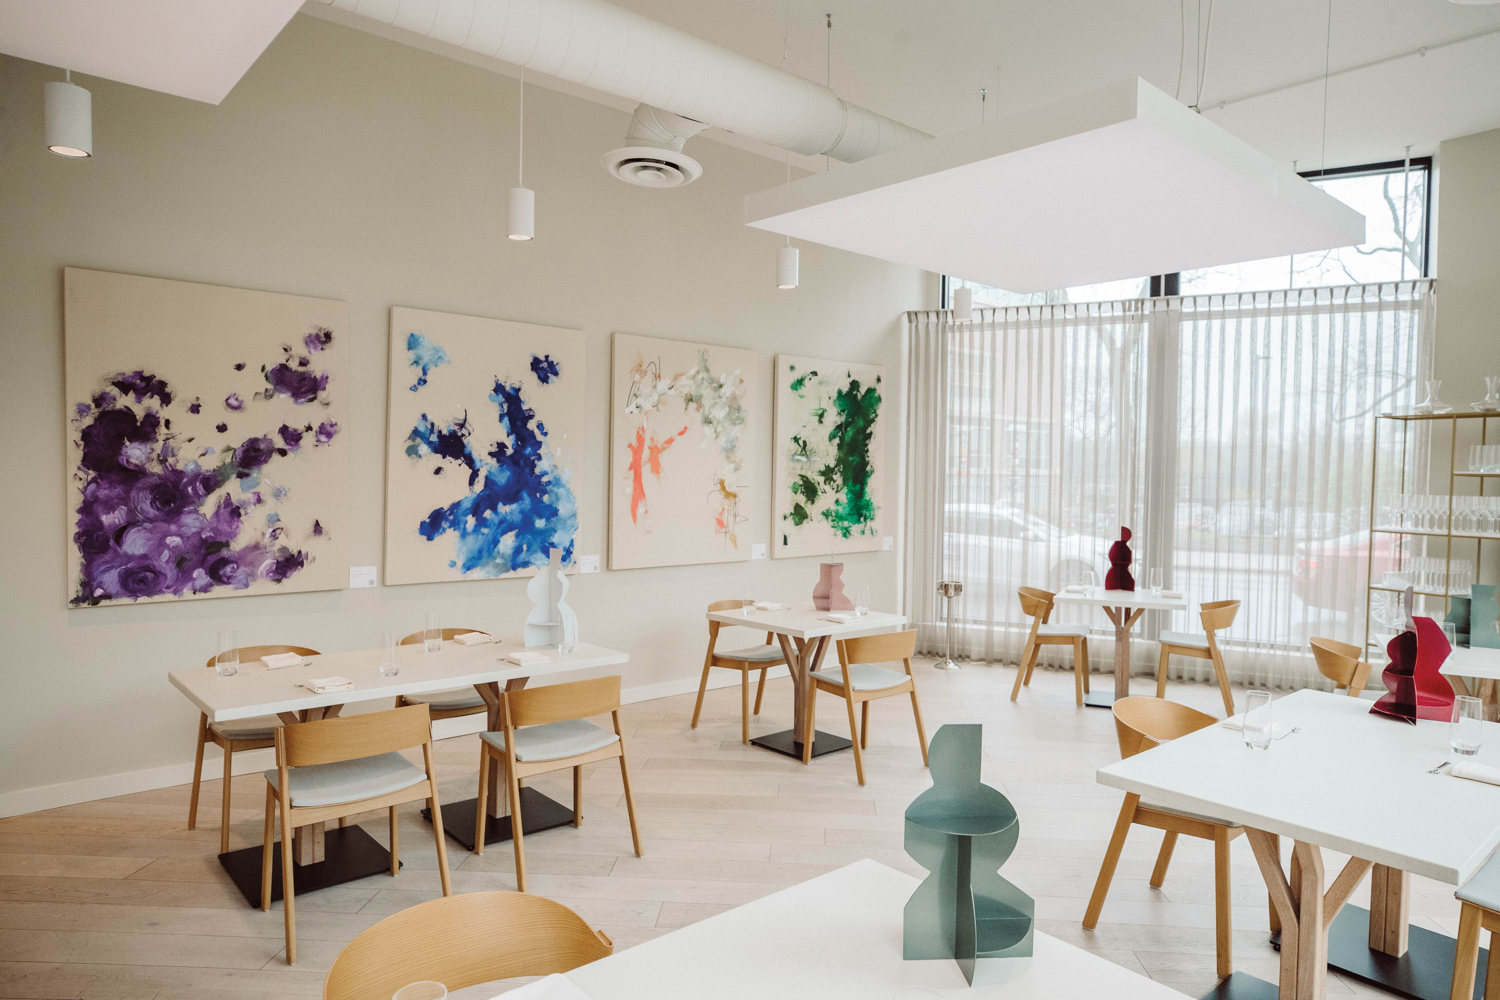 Neutral-colored restaurant with colorful, abstract art on walls.